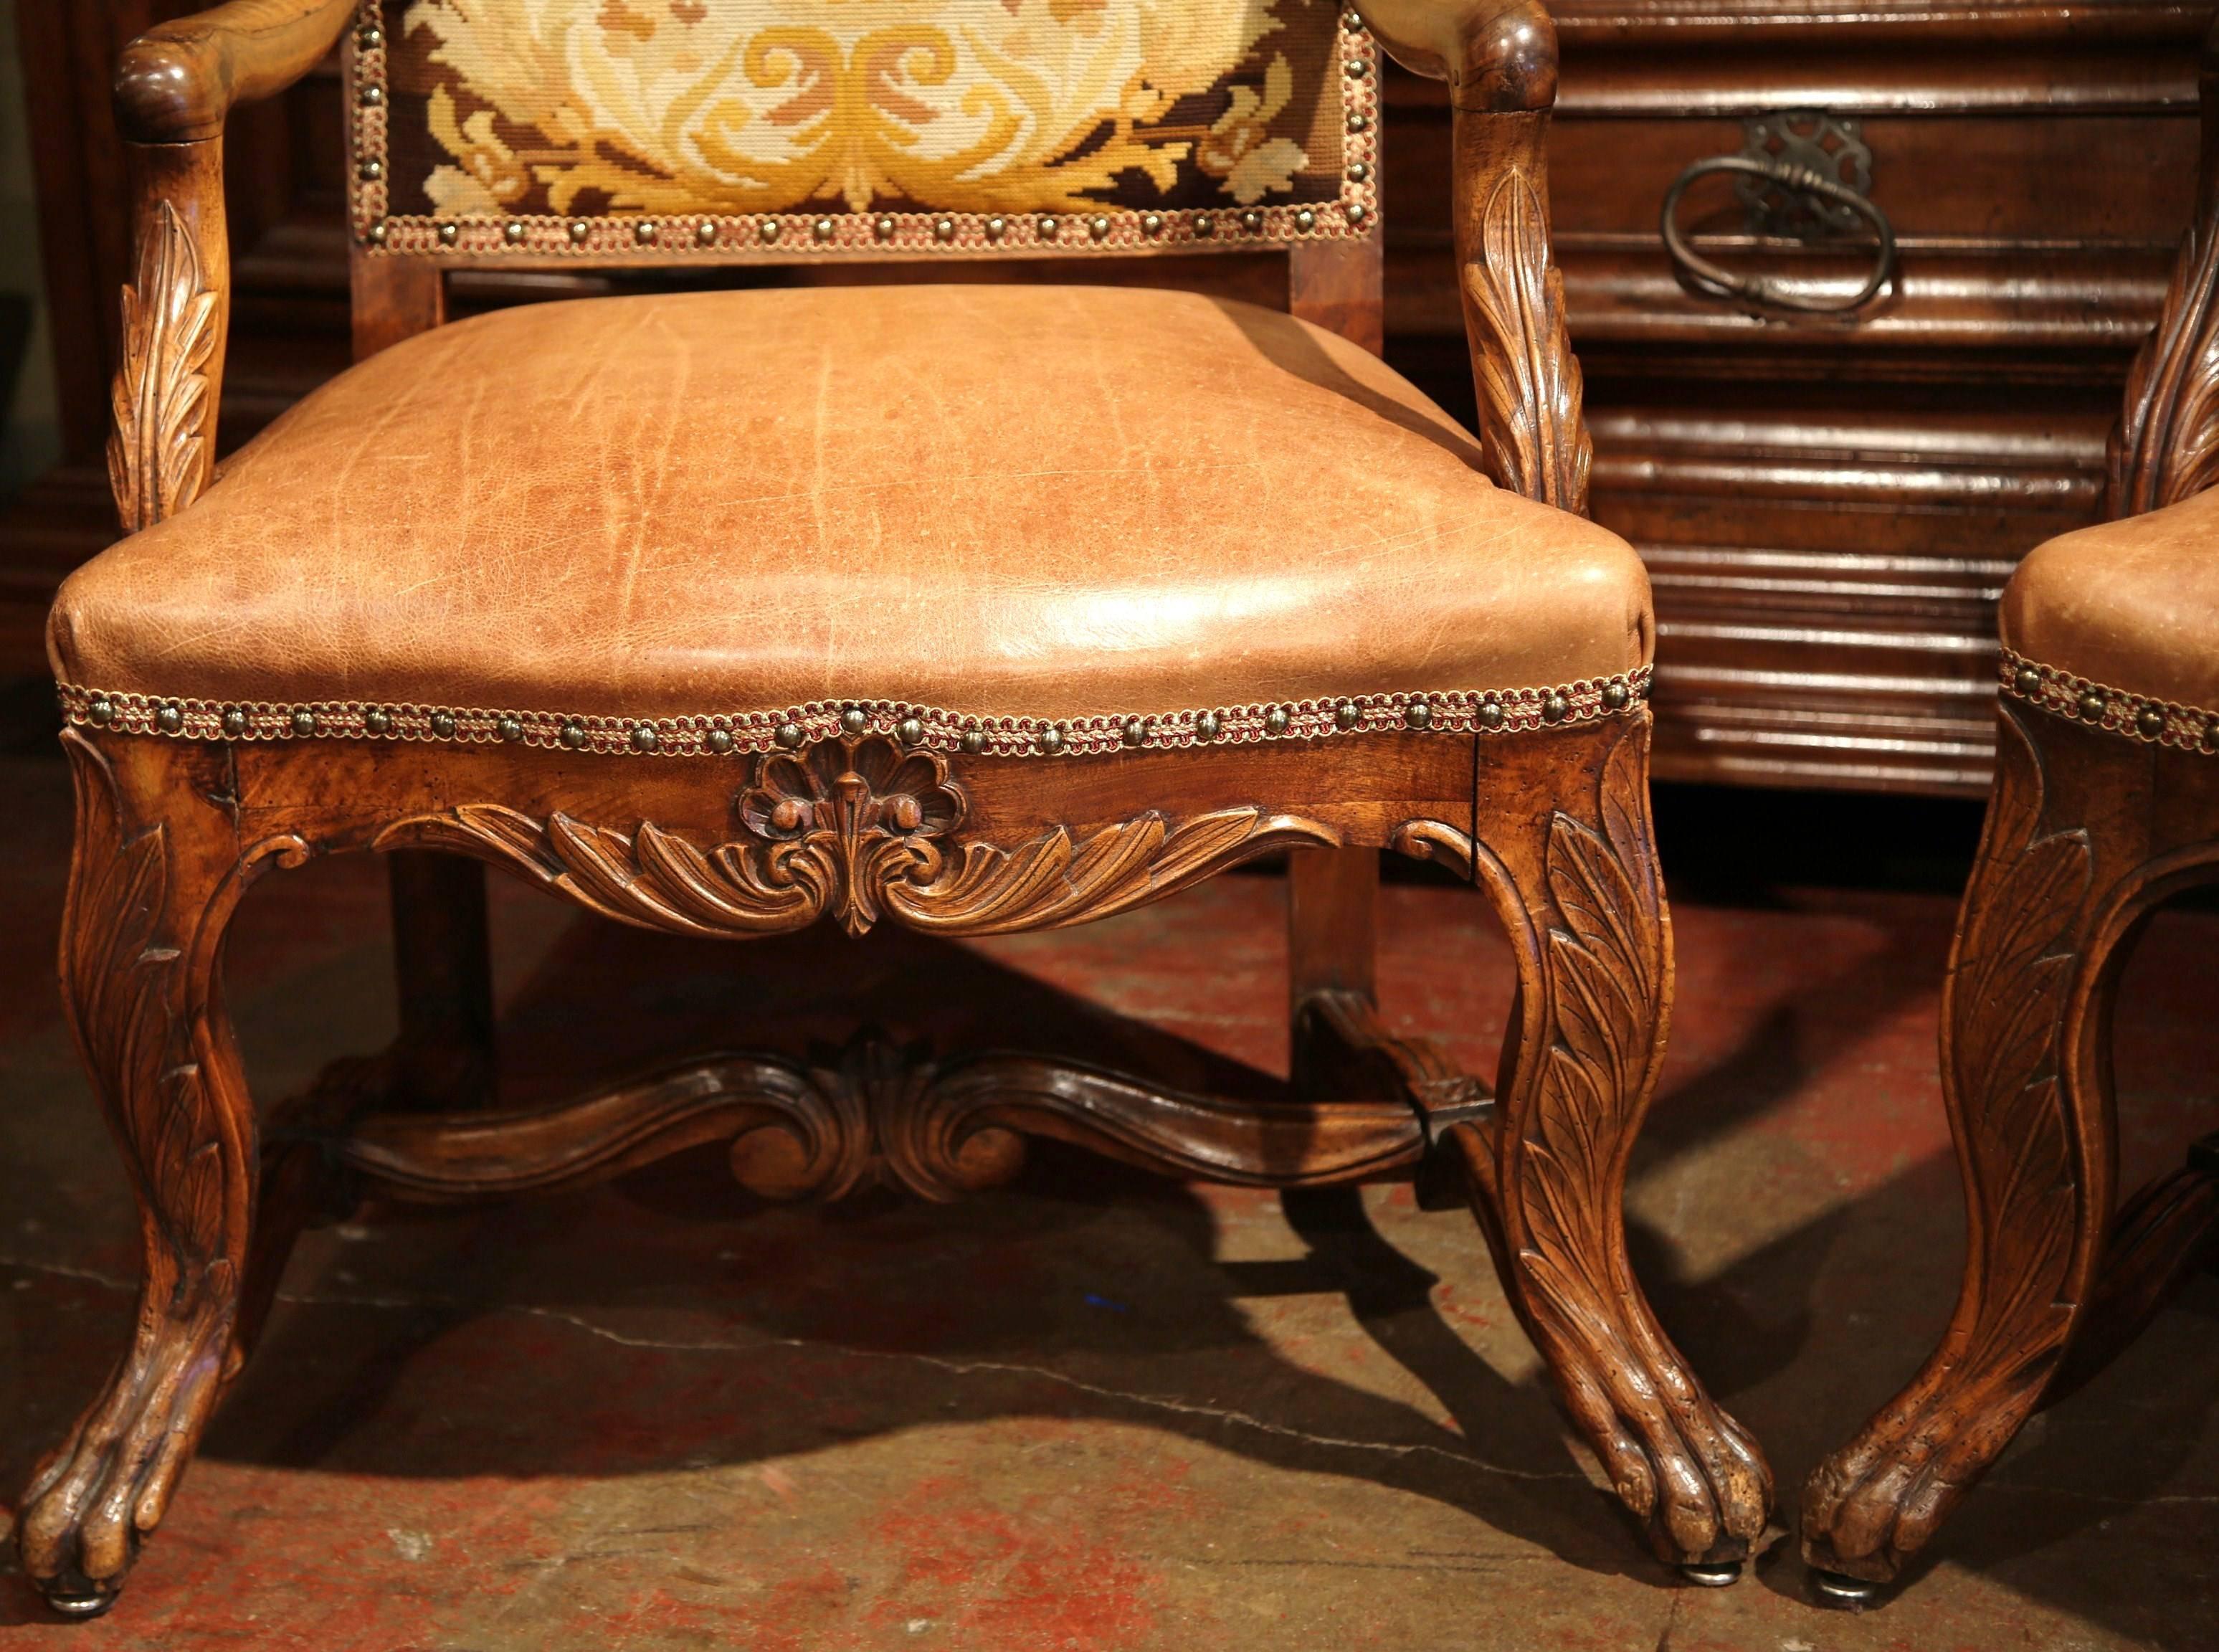 These antique fruitwood armchairs were crafted in France, circa 1760, and would make an elegant addition to a living room, study or library. The chairs stands on cabriole legs ending with paw feet over a scalloped apron decorated with floral and